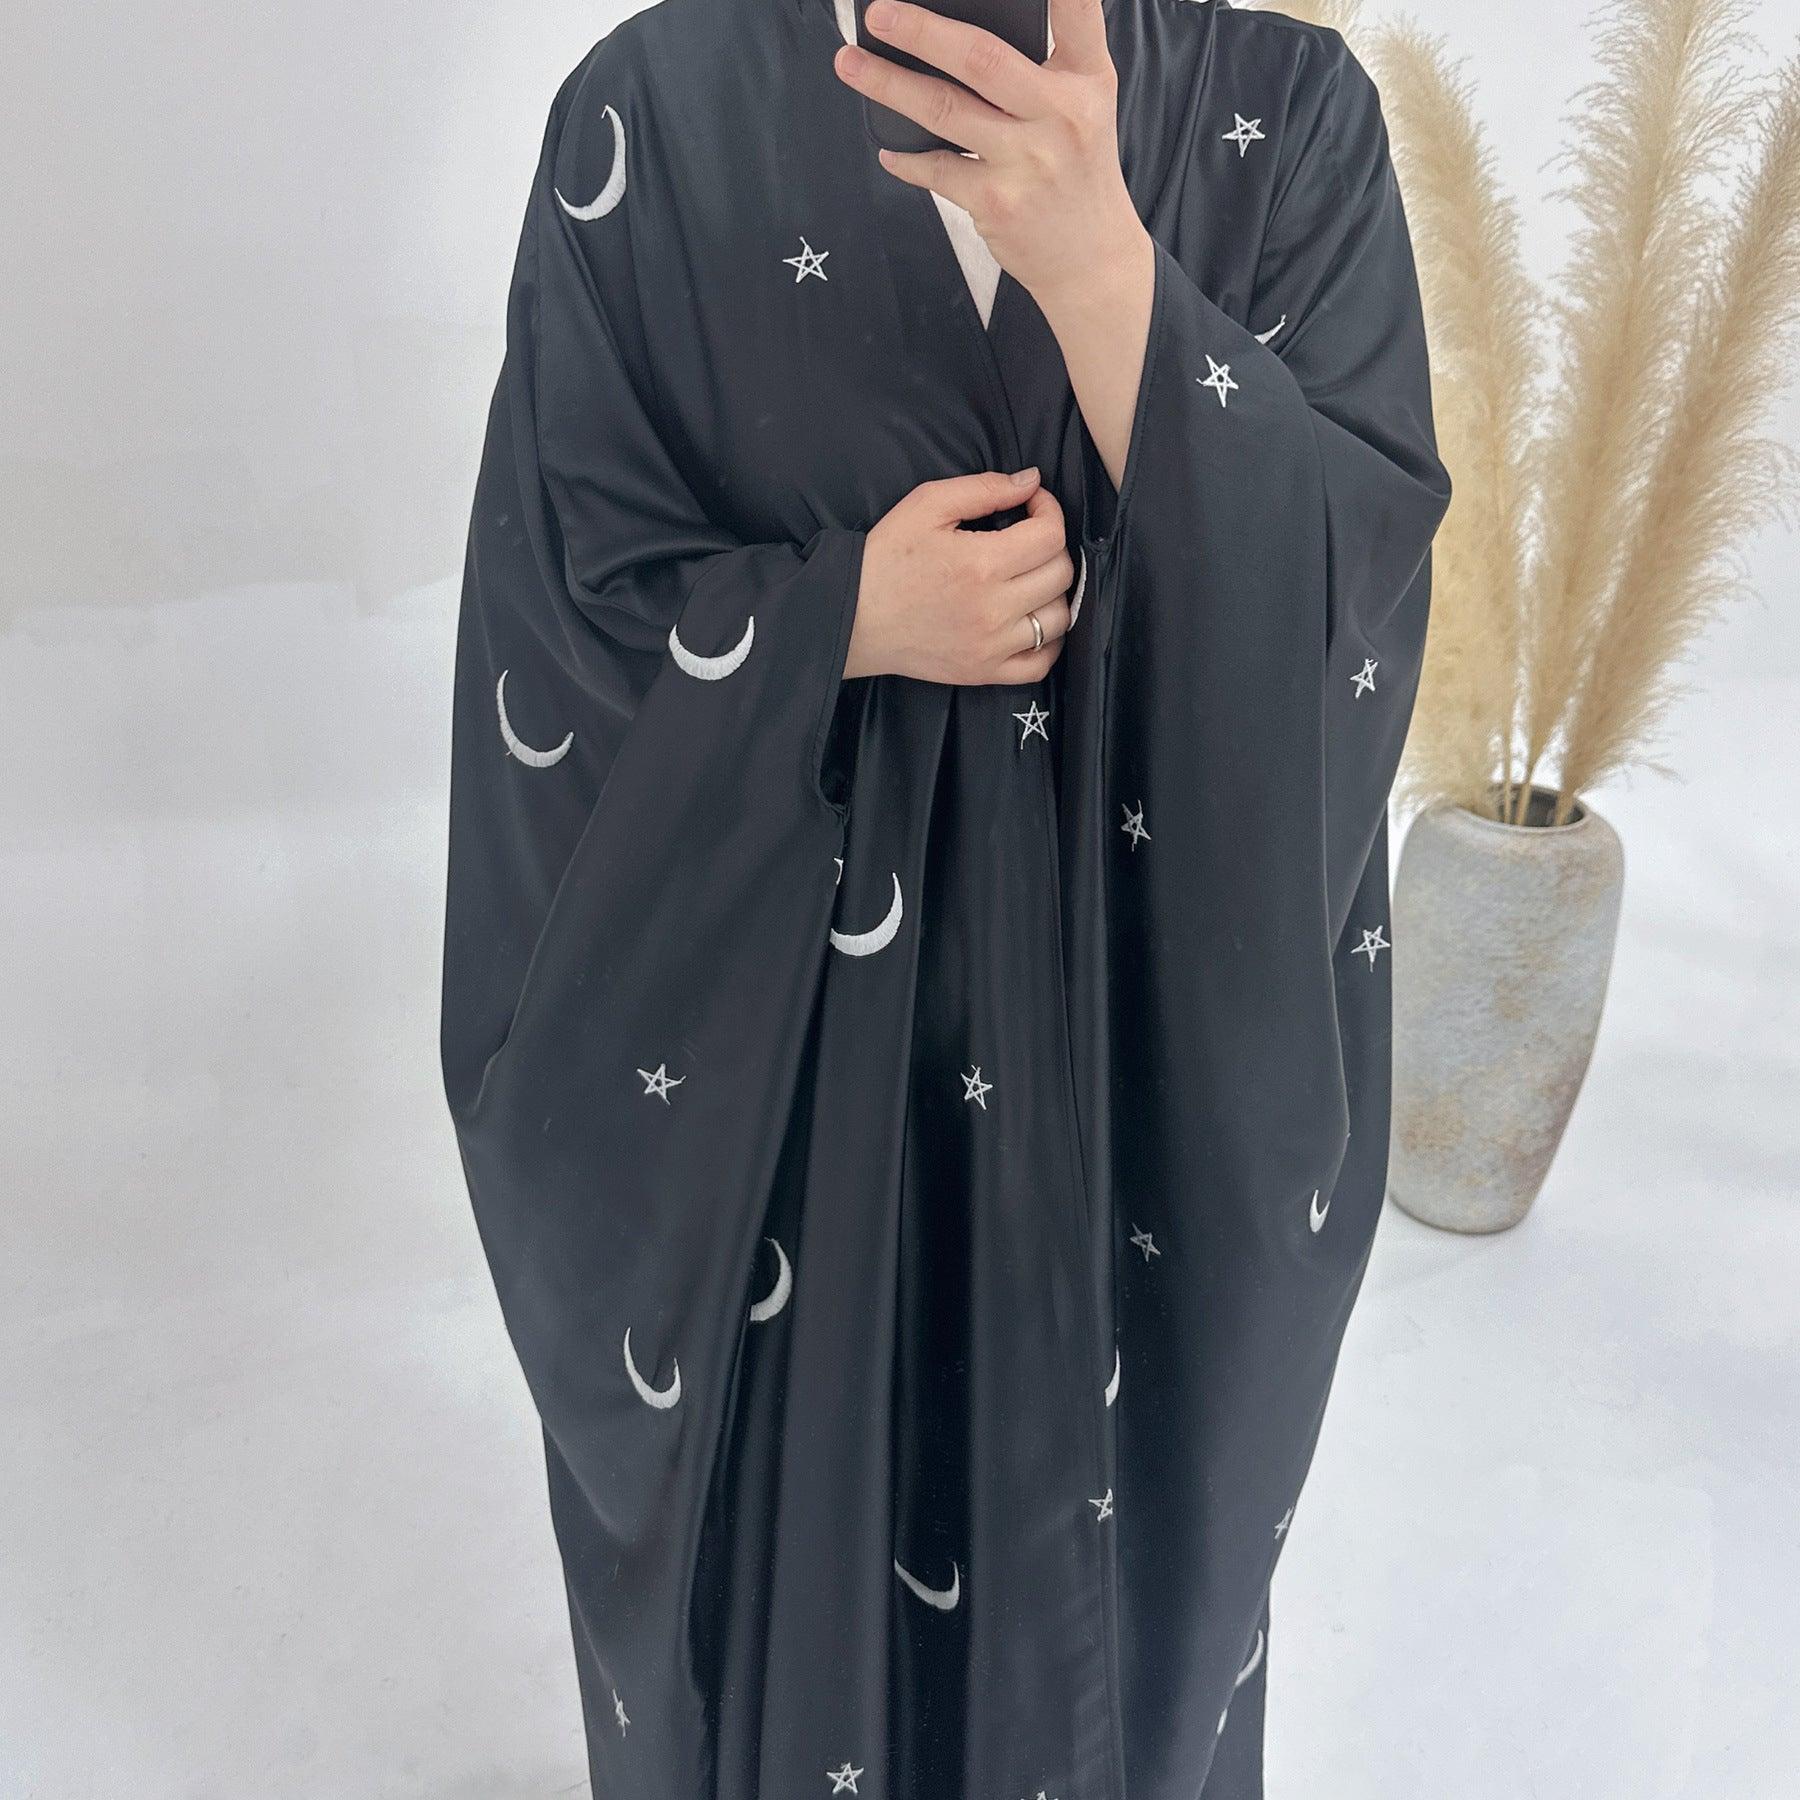 MOA043 Eid Abaya Design Moon and Star Embroidery Open Abaya - Mariam's Collection